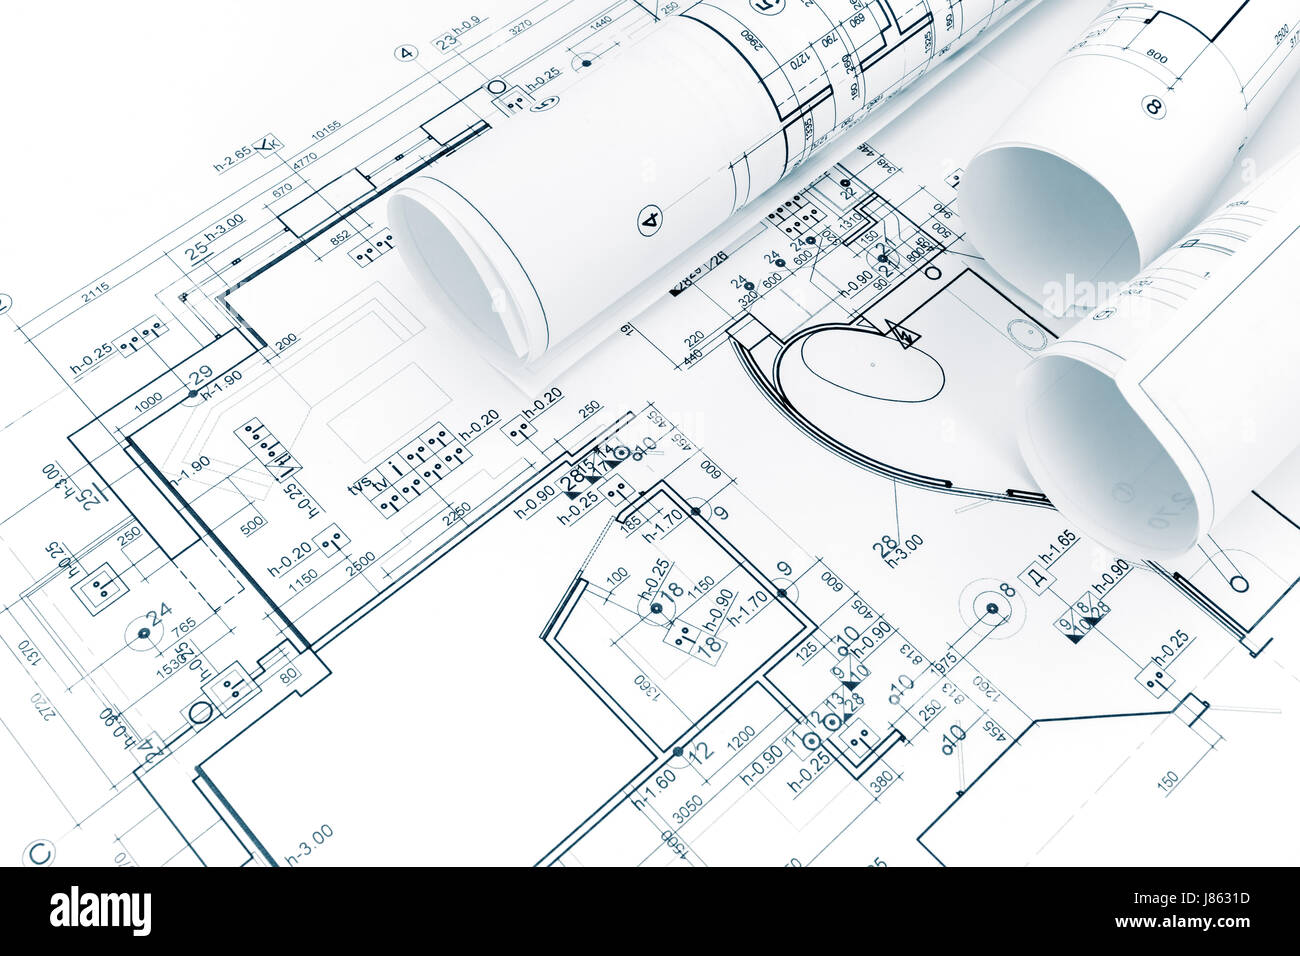 architectural background with rolls of technical drawings and blueprints Stock Photo